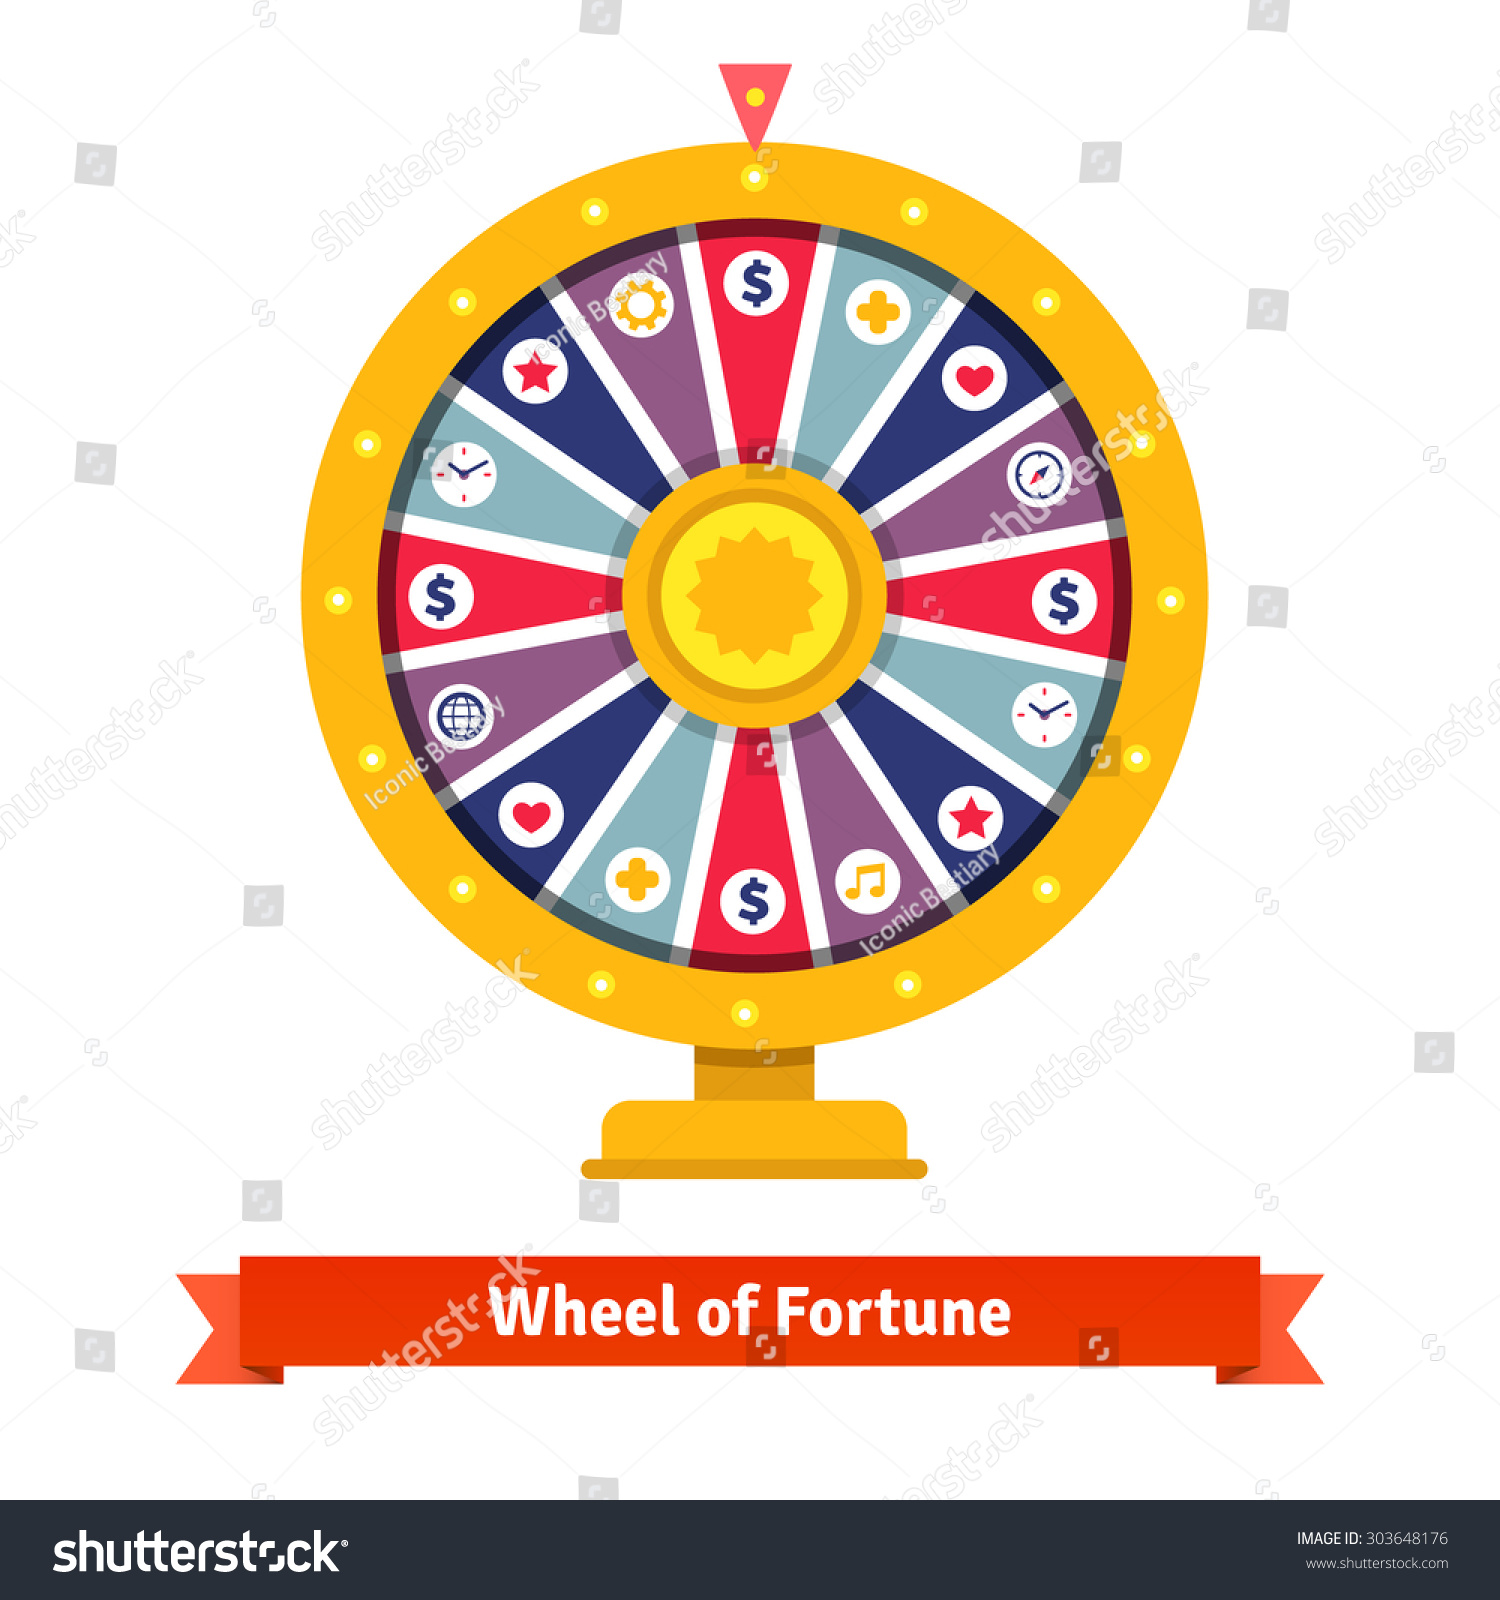 Wheel Fortune Bets Icons Flat Style Stock Vector 303648176 - Shutterstock1500 x 1600